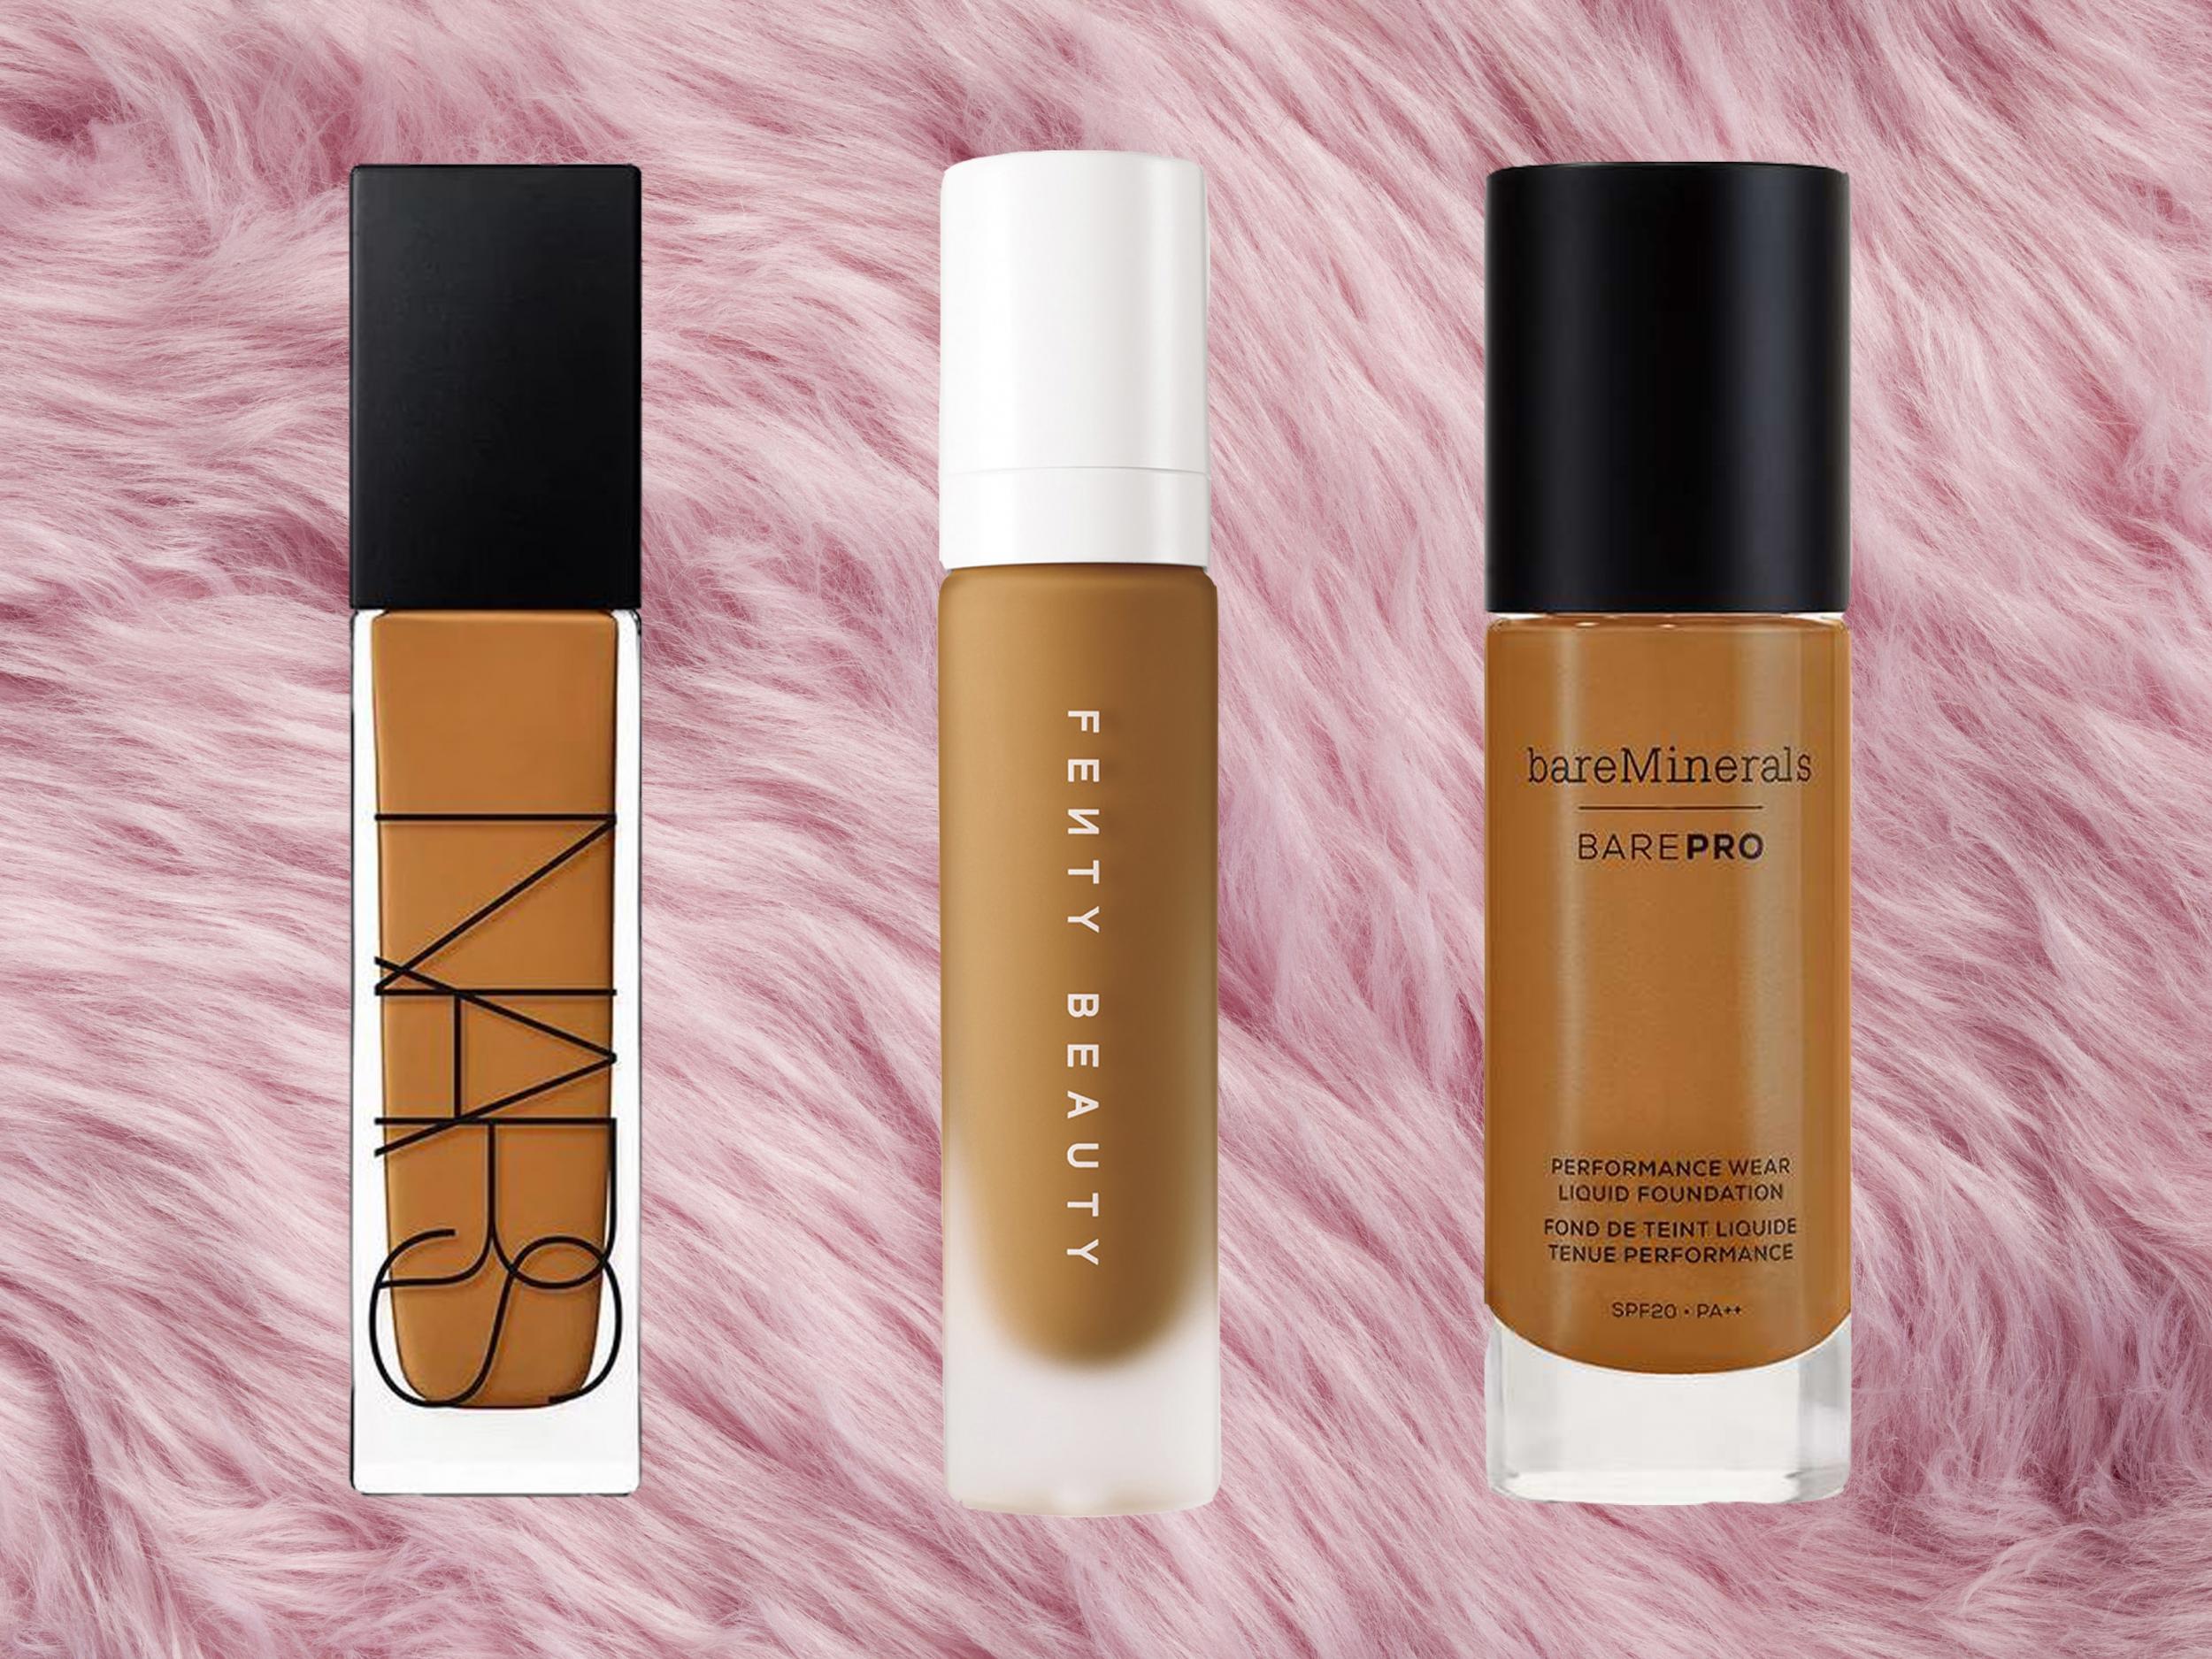 Maybelline Better Skin Foundation Colour Chart